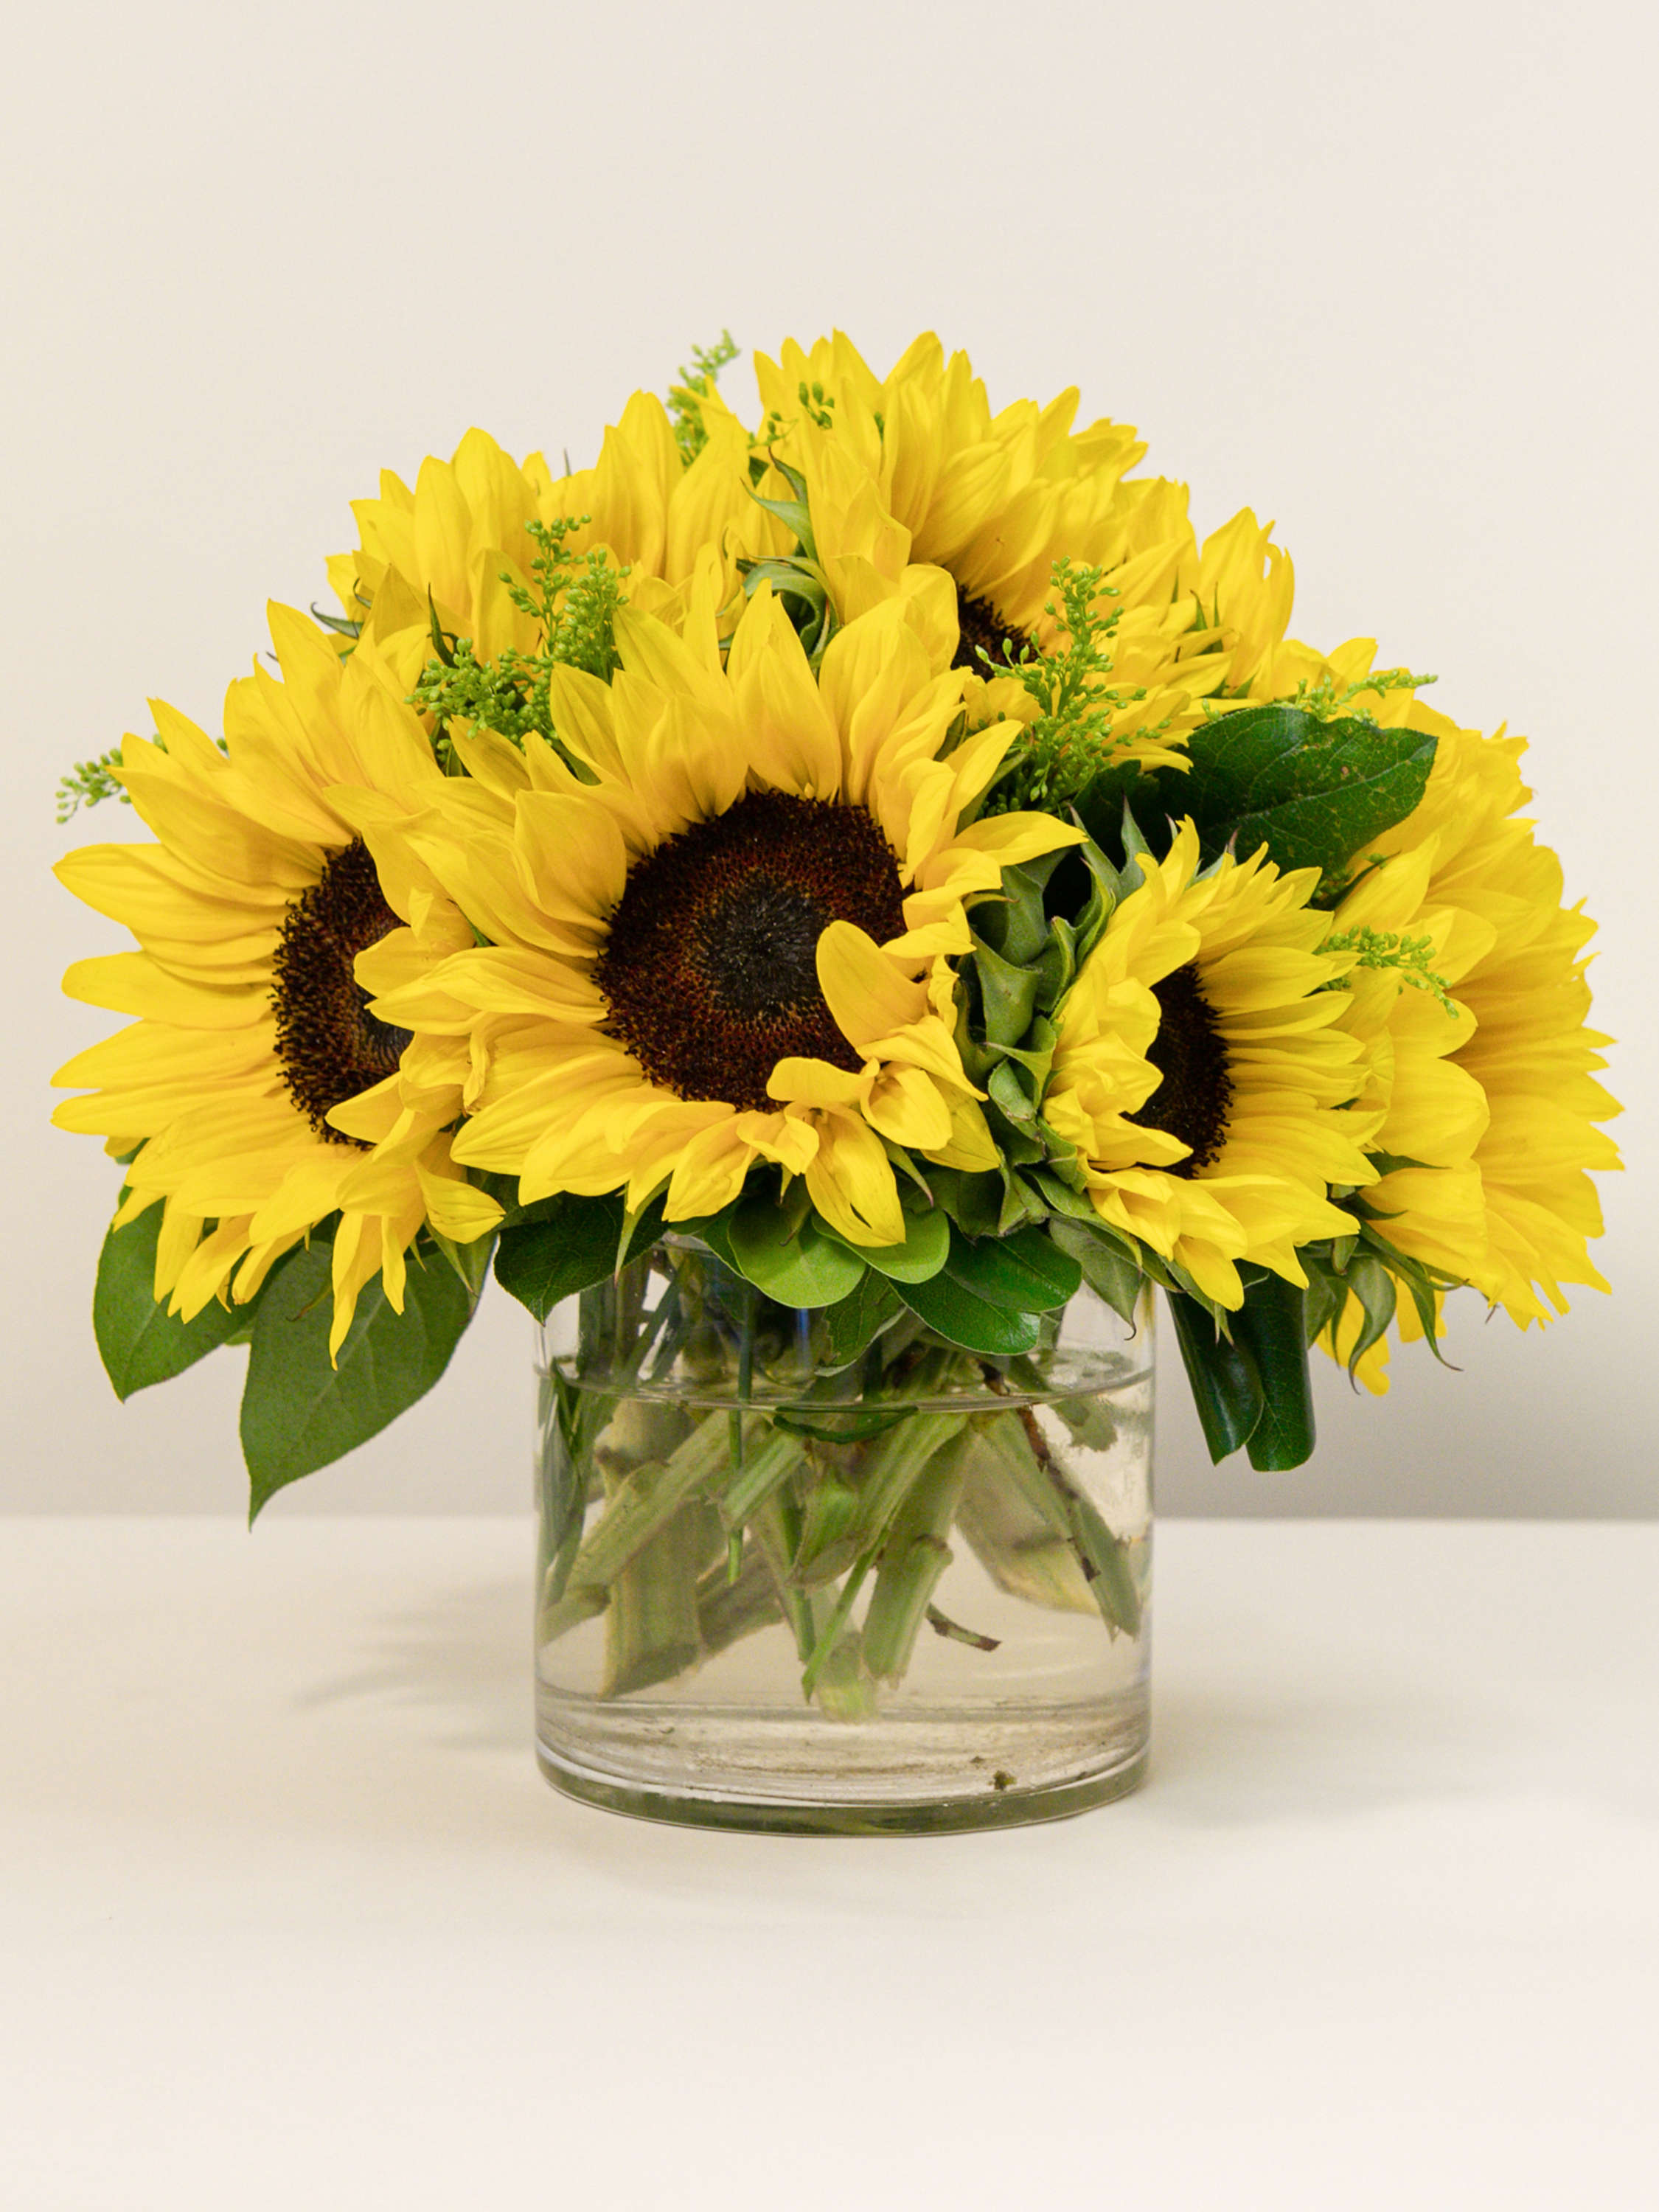 Vase Of Smiling Sunflowers - Los Angeles, Ca #1 Florist - French Florist